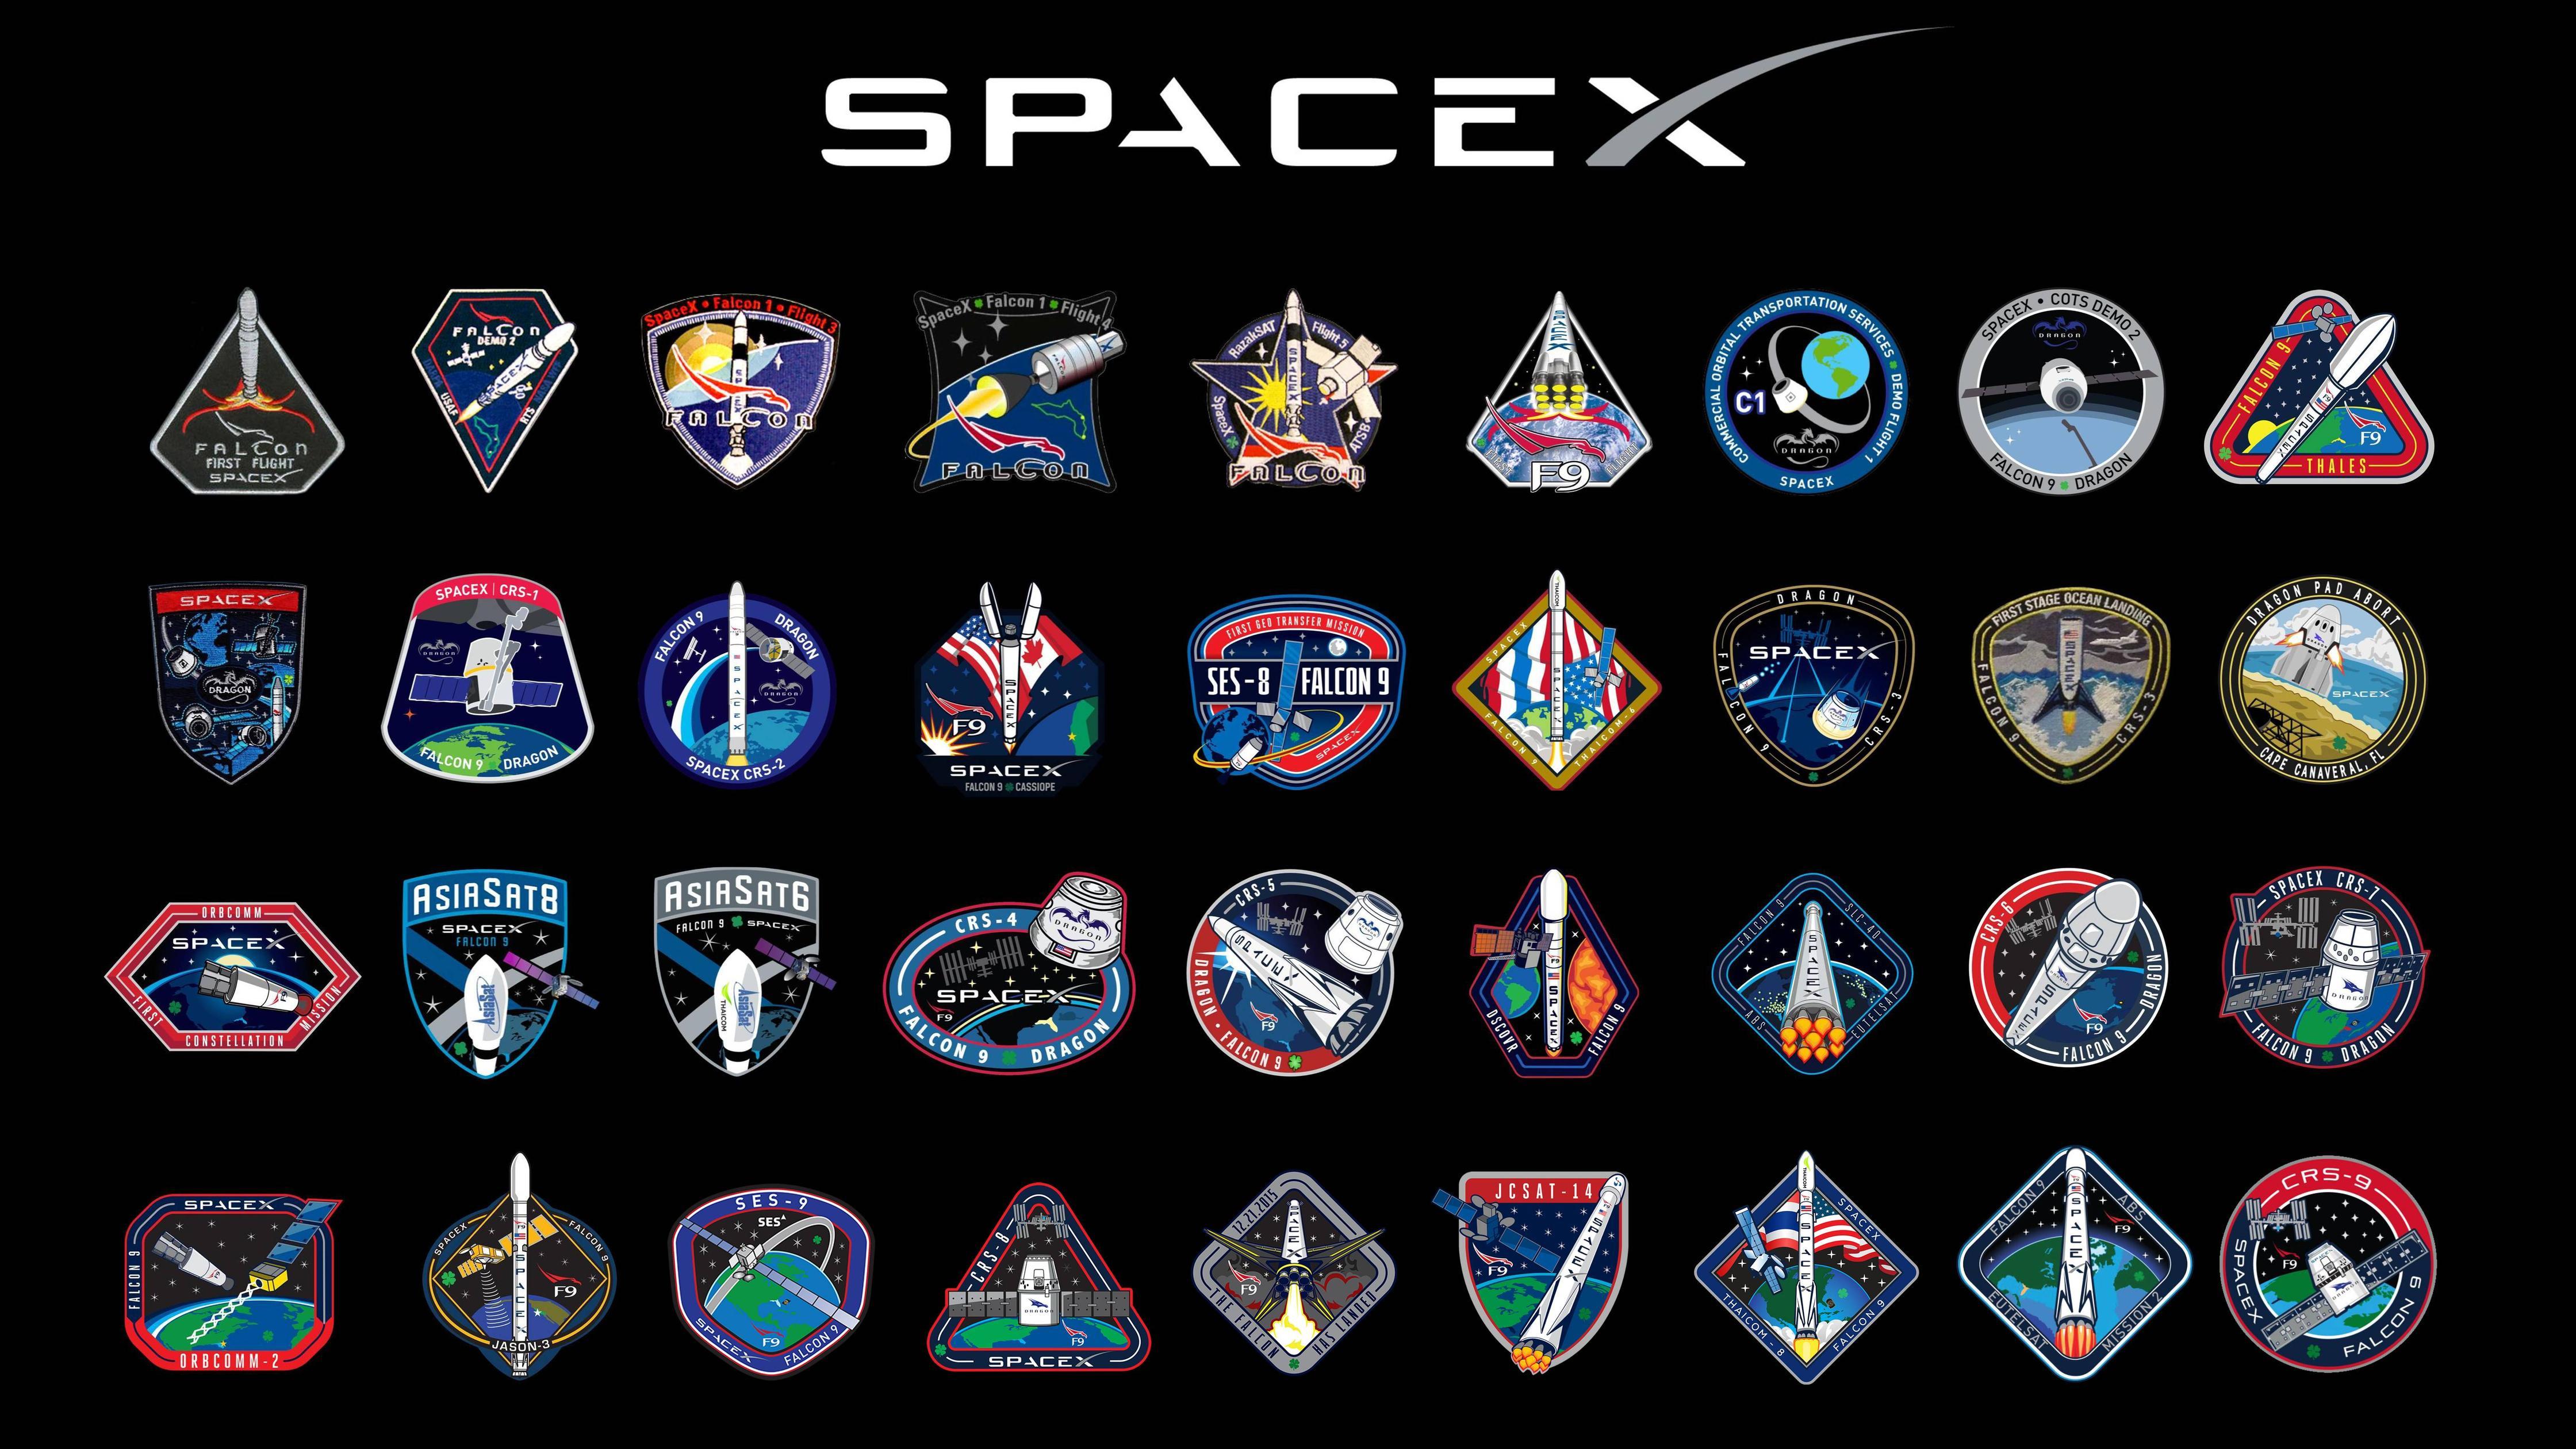 SpaceX Mission Patch 16:9 Wallpaper